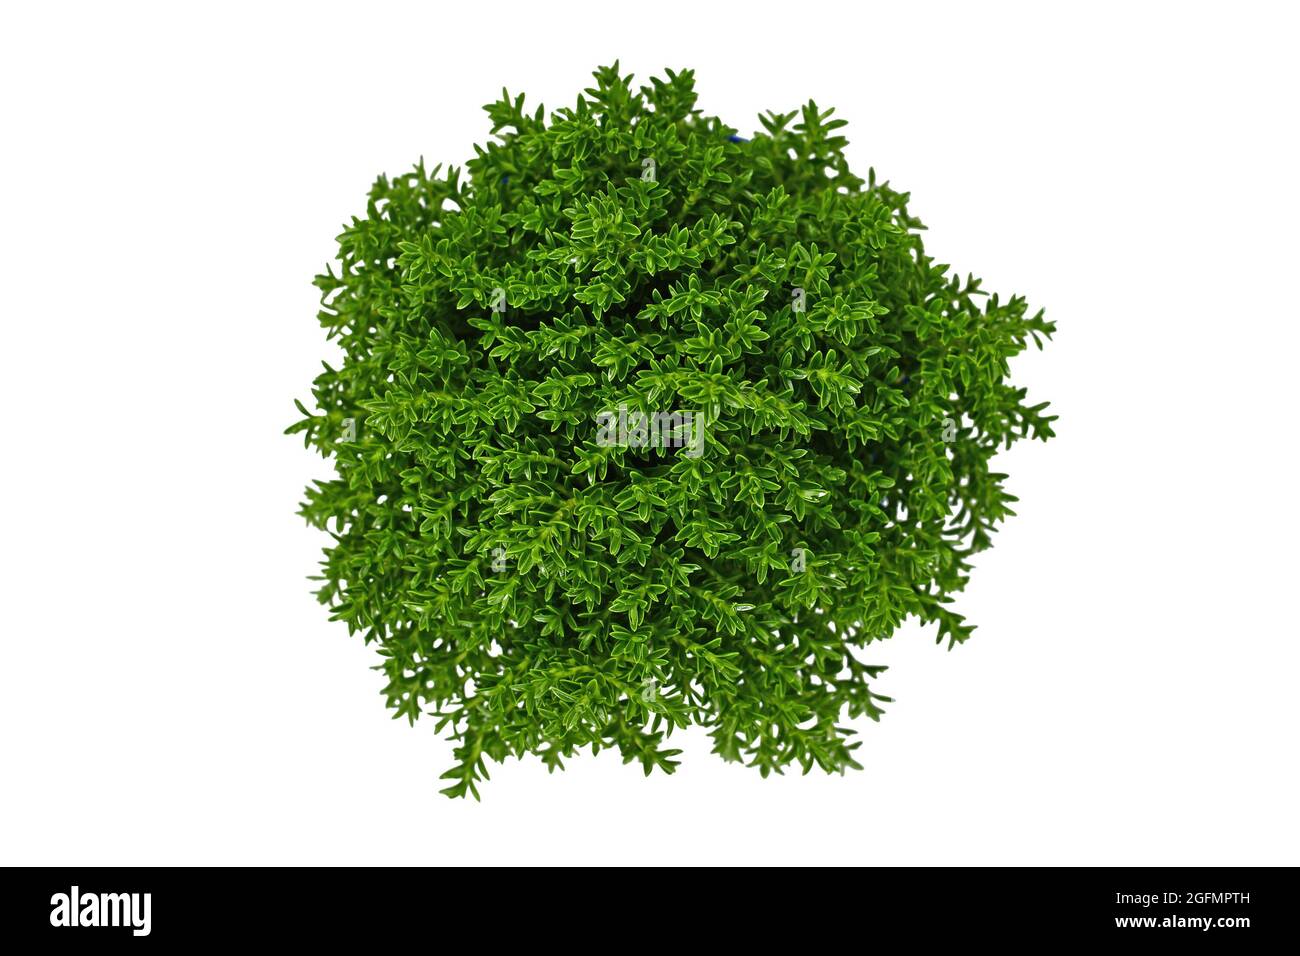 Top view of 'Hebe Armstrongii' hybrid plant on white background Stock Photo